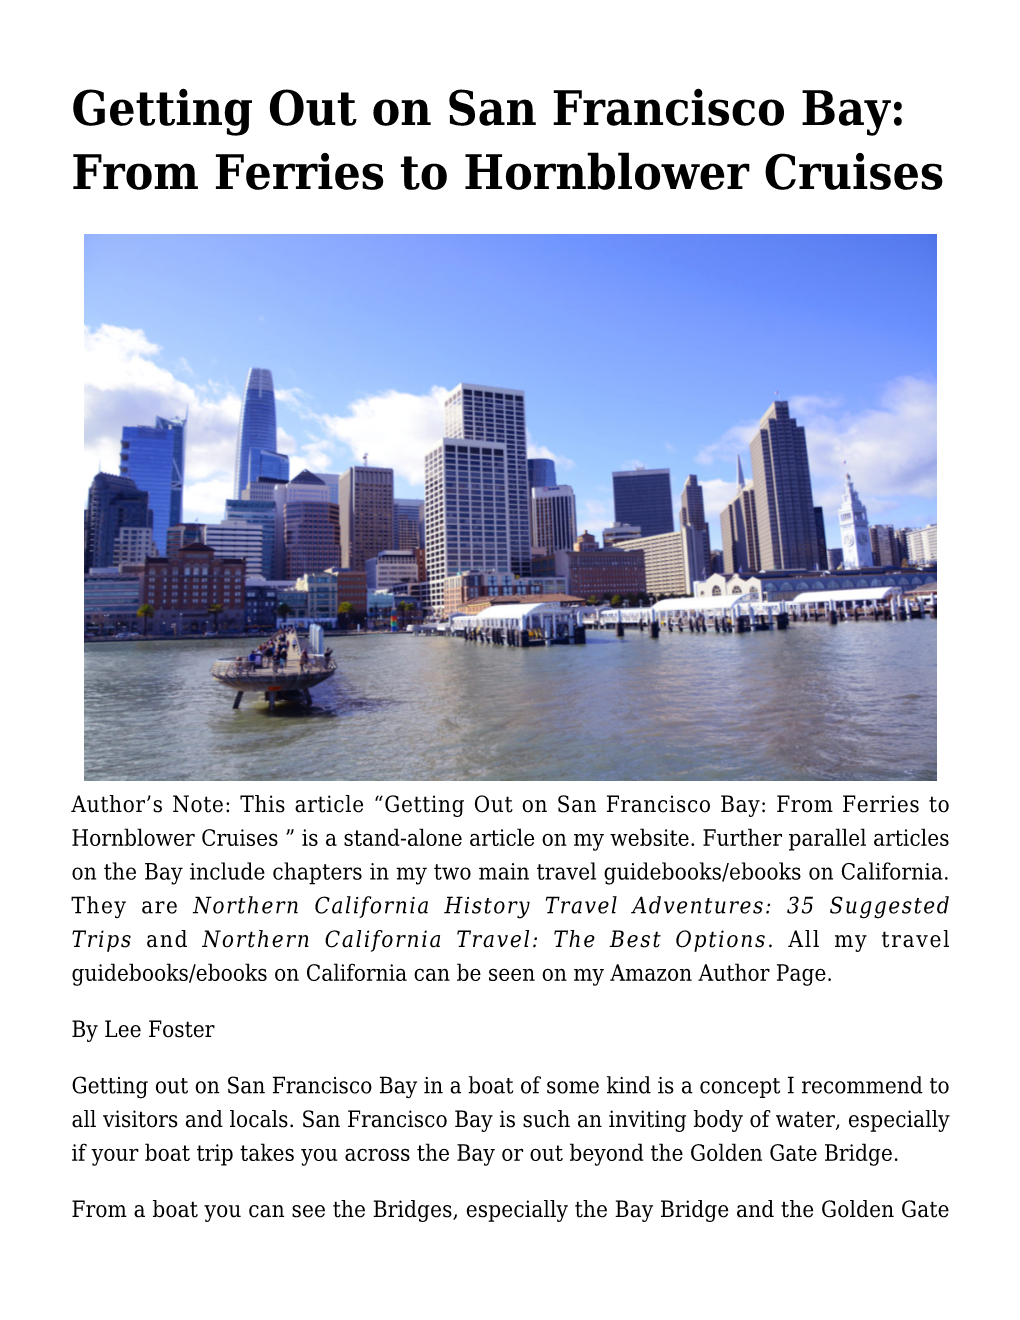 From Ferries to Hornblower Cruises